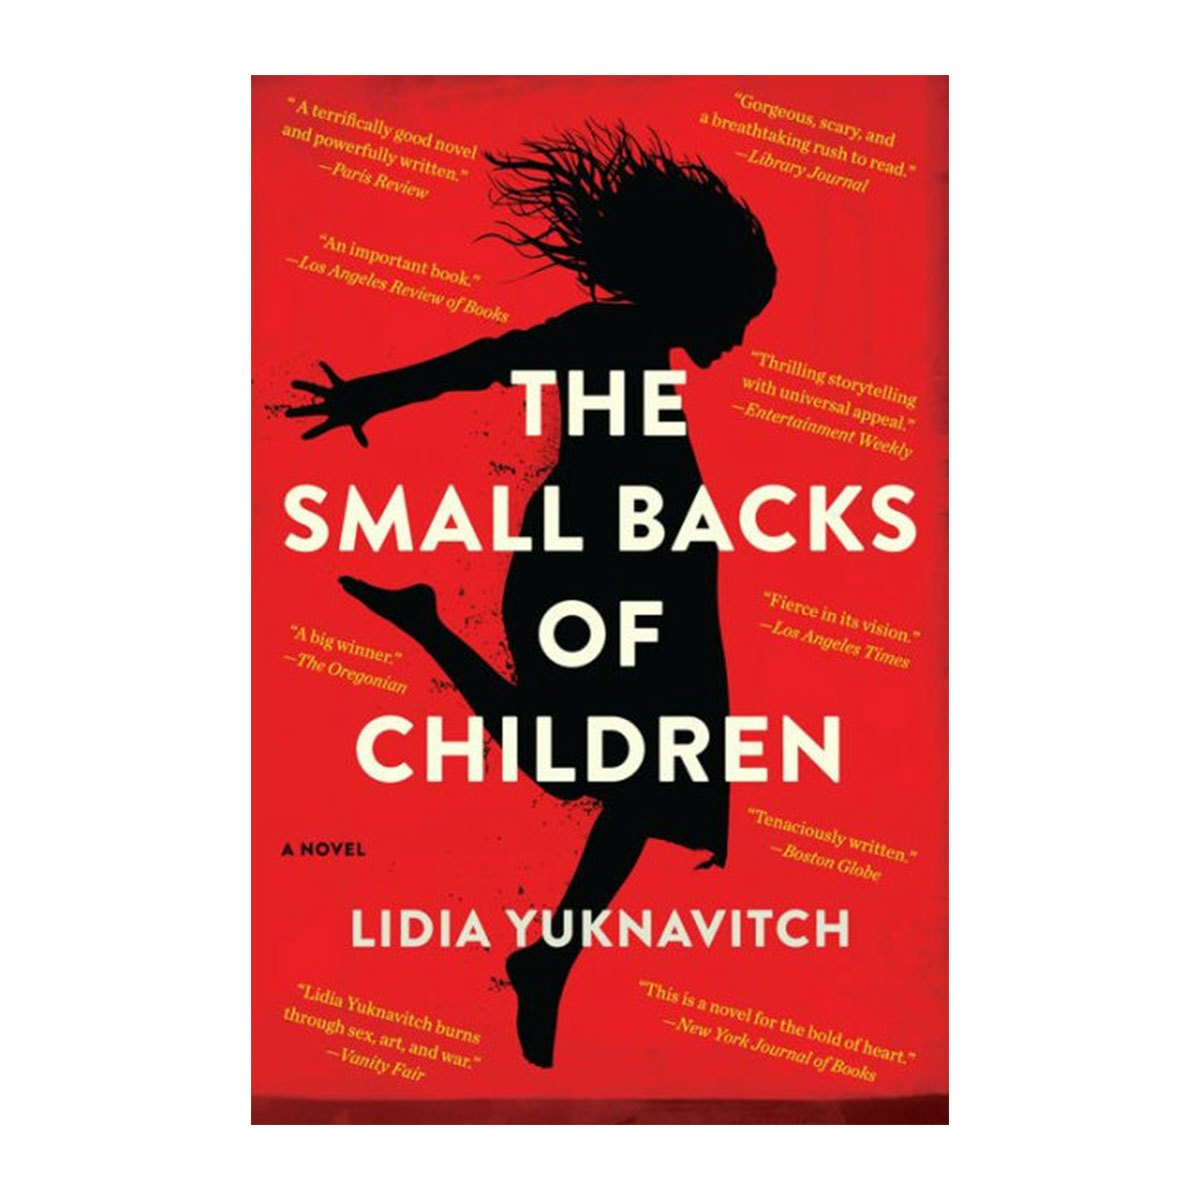 The Small Backs of Children by Lidia Yuknavitch